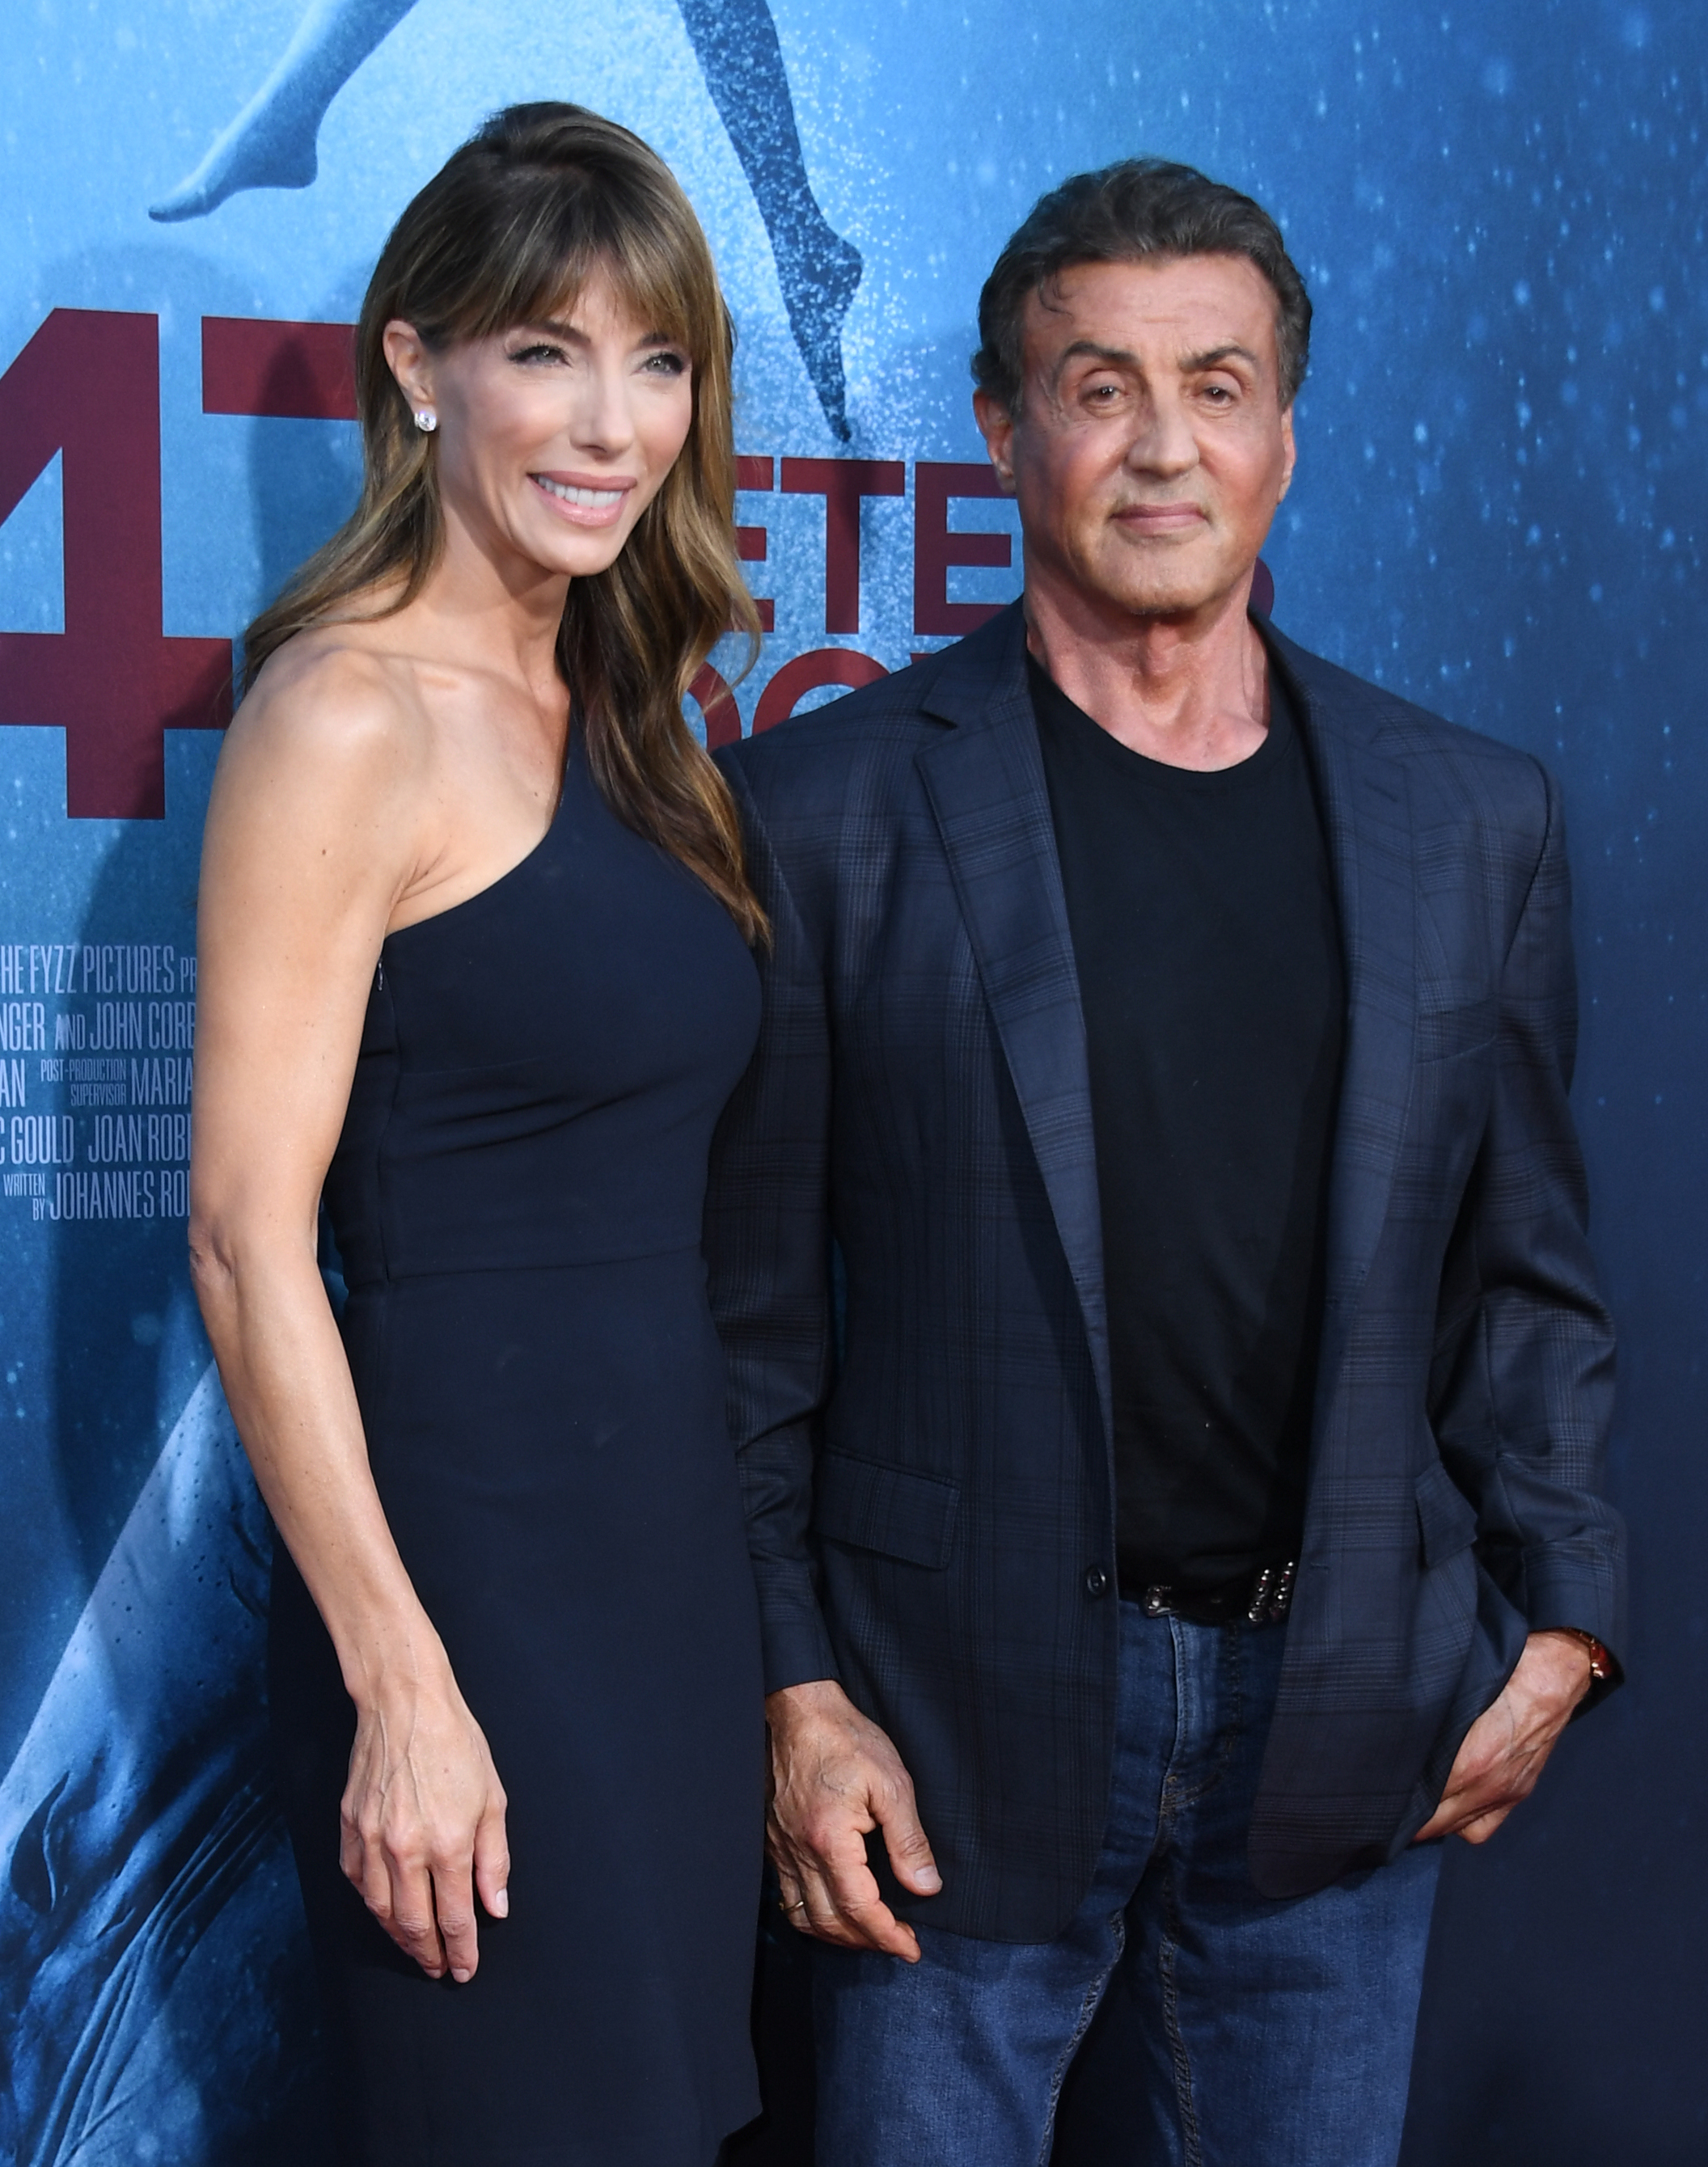 Rocky actor Sylvester Stallone's marriage breakdown with Jennifer Flavin has now been pointed out to be due to his dog